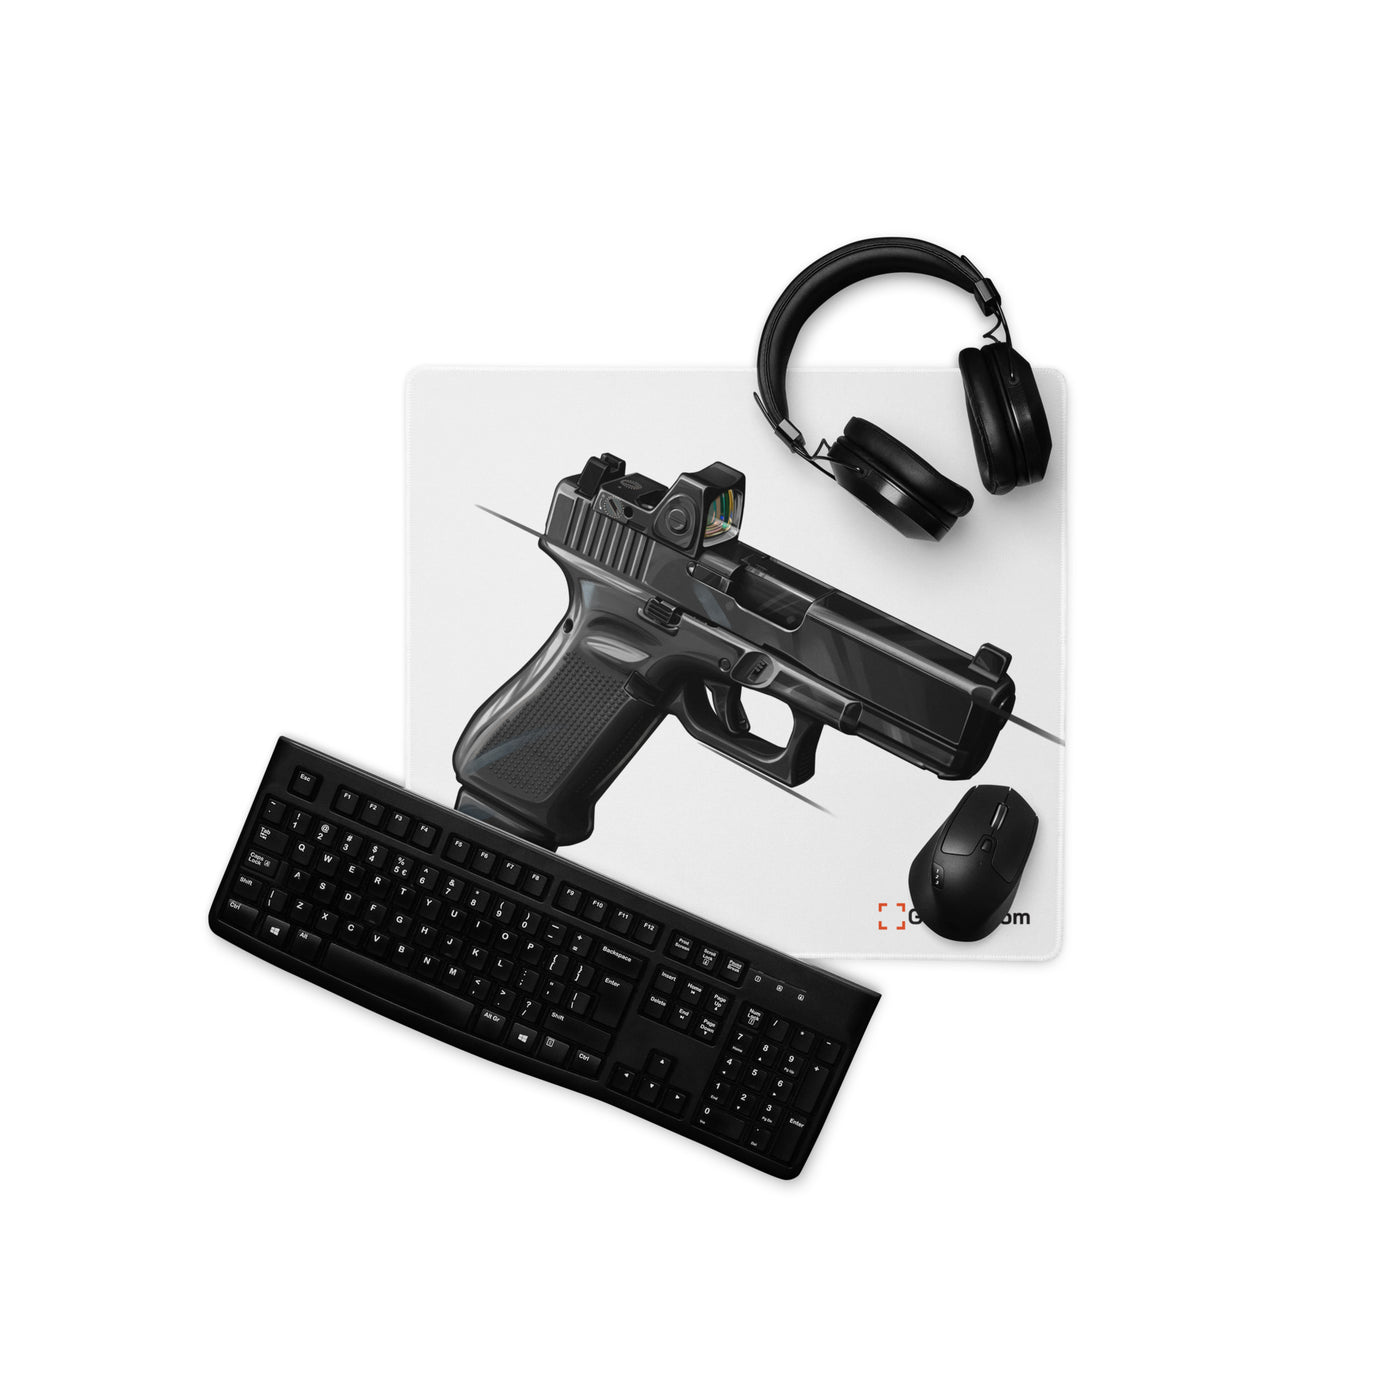 The Last Resort - OG Black Poly Pistol Gaming Mouse Pad - Just The Piece - White Background